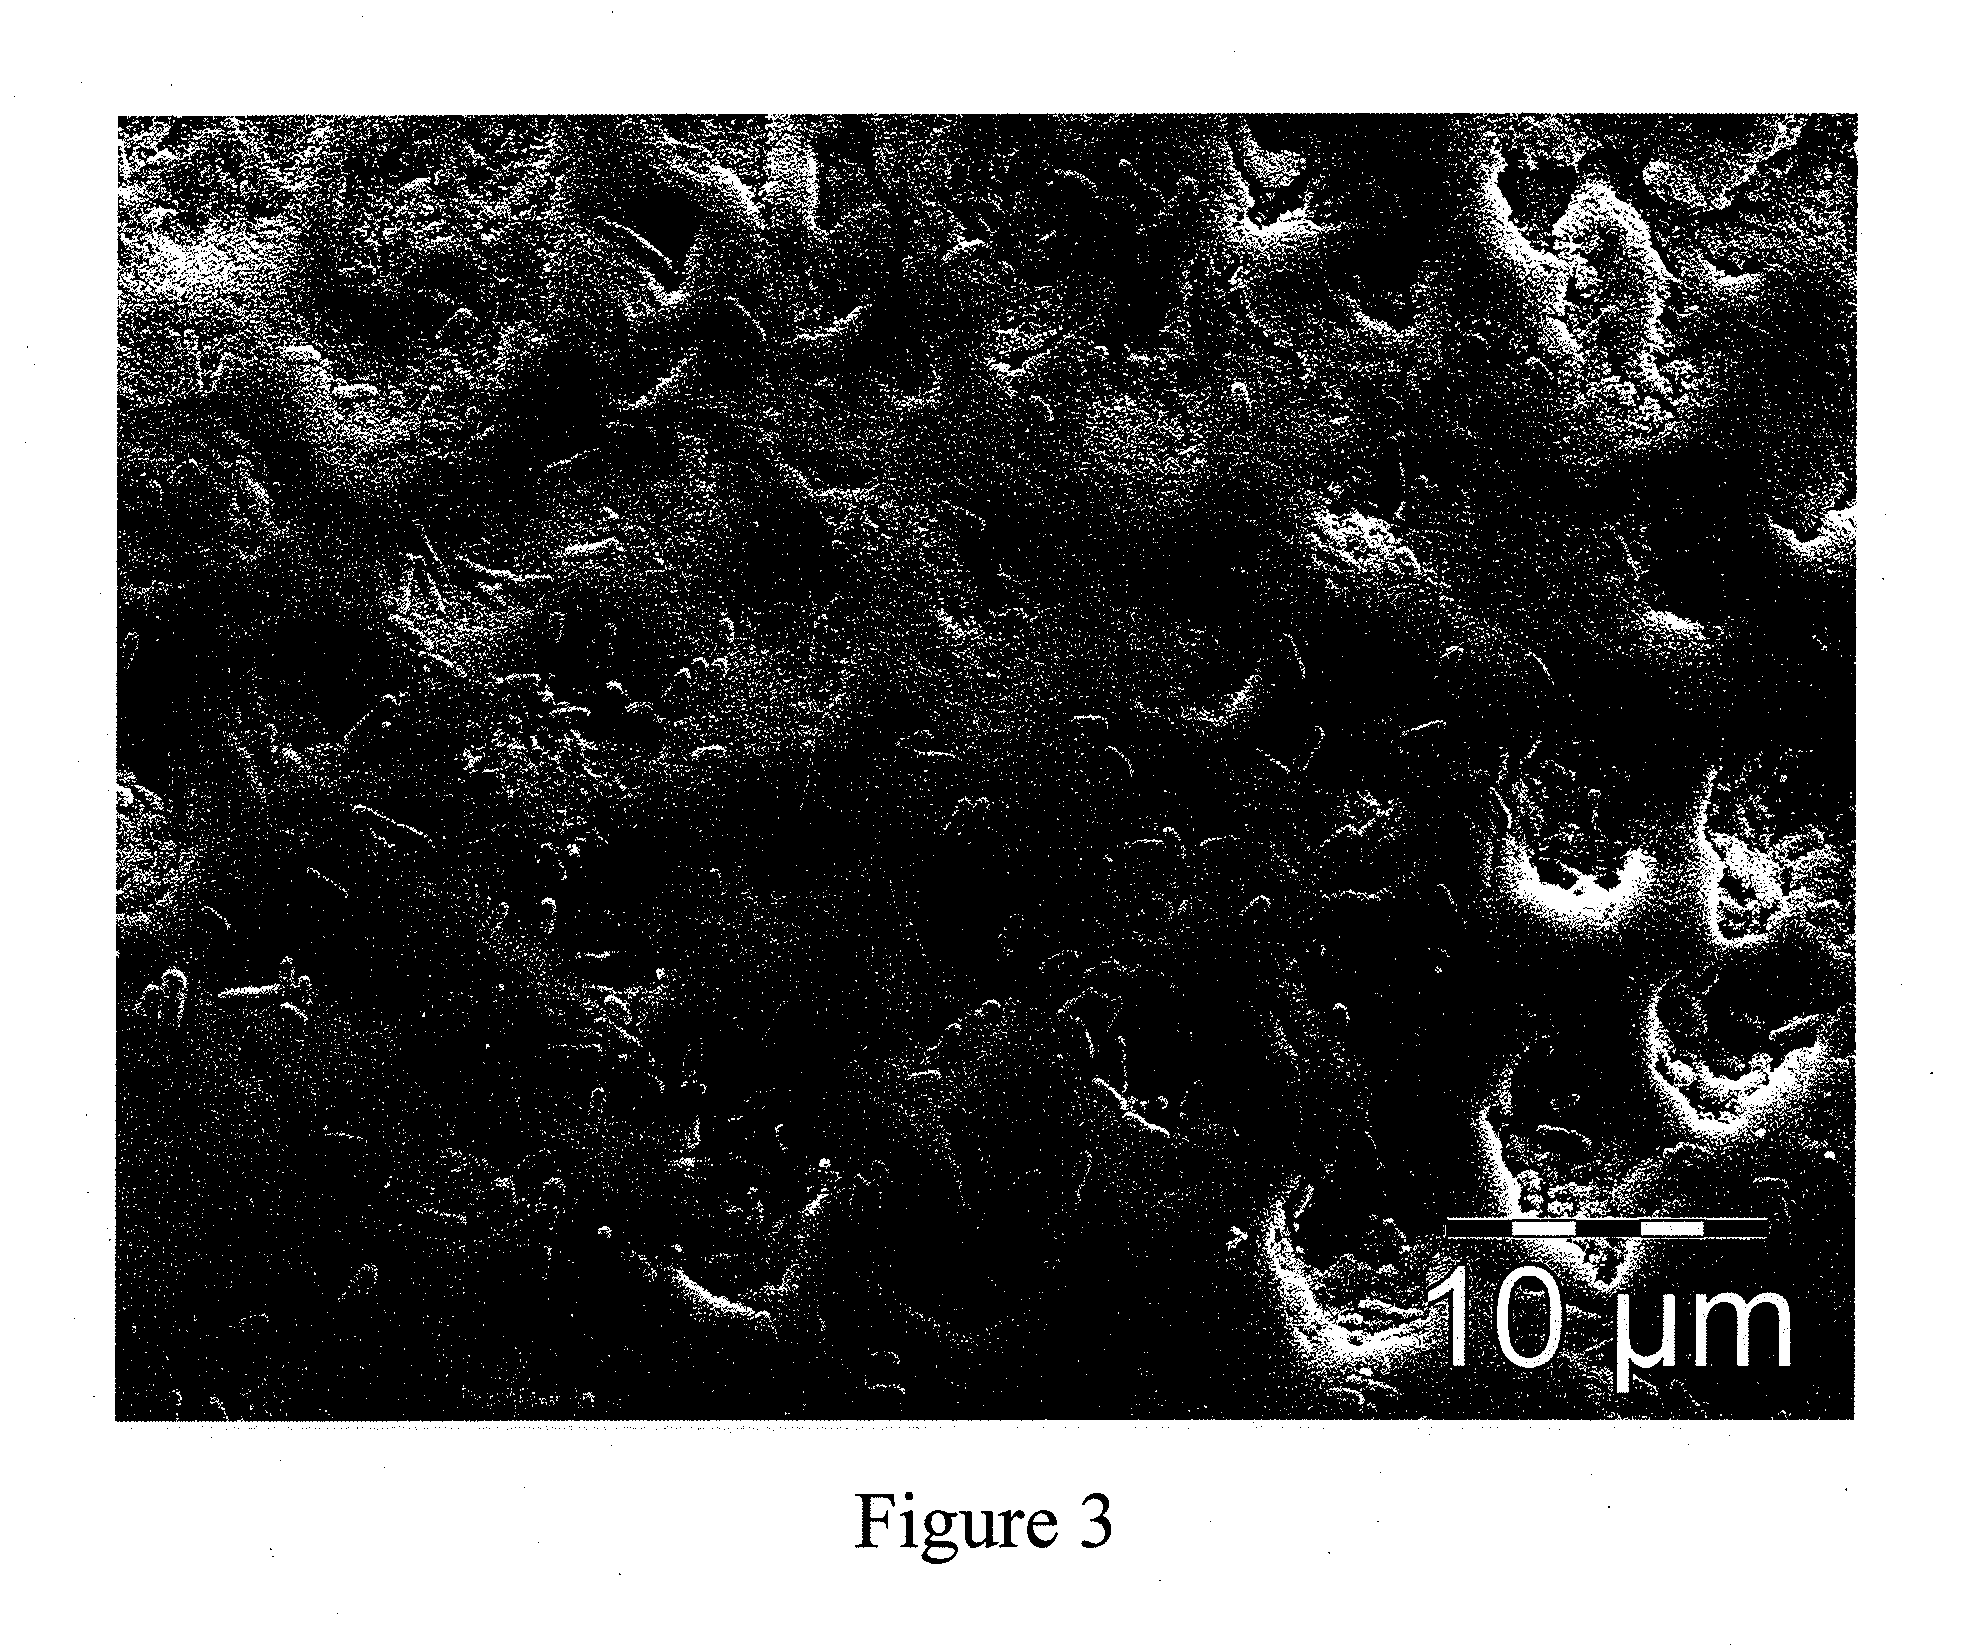 Method for alleviating the undesired side effects of dental bleaching